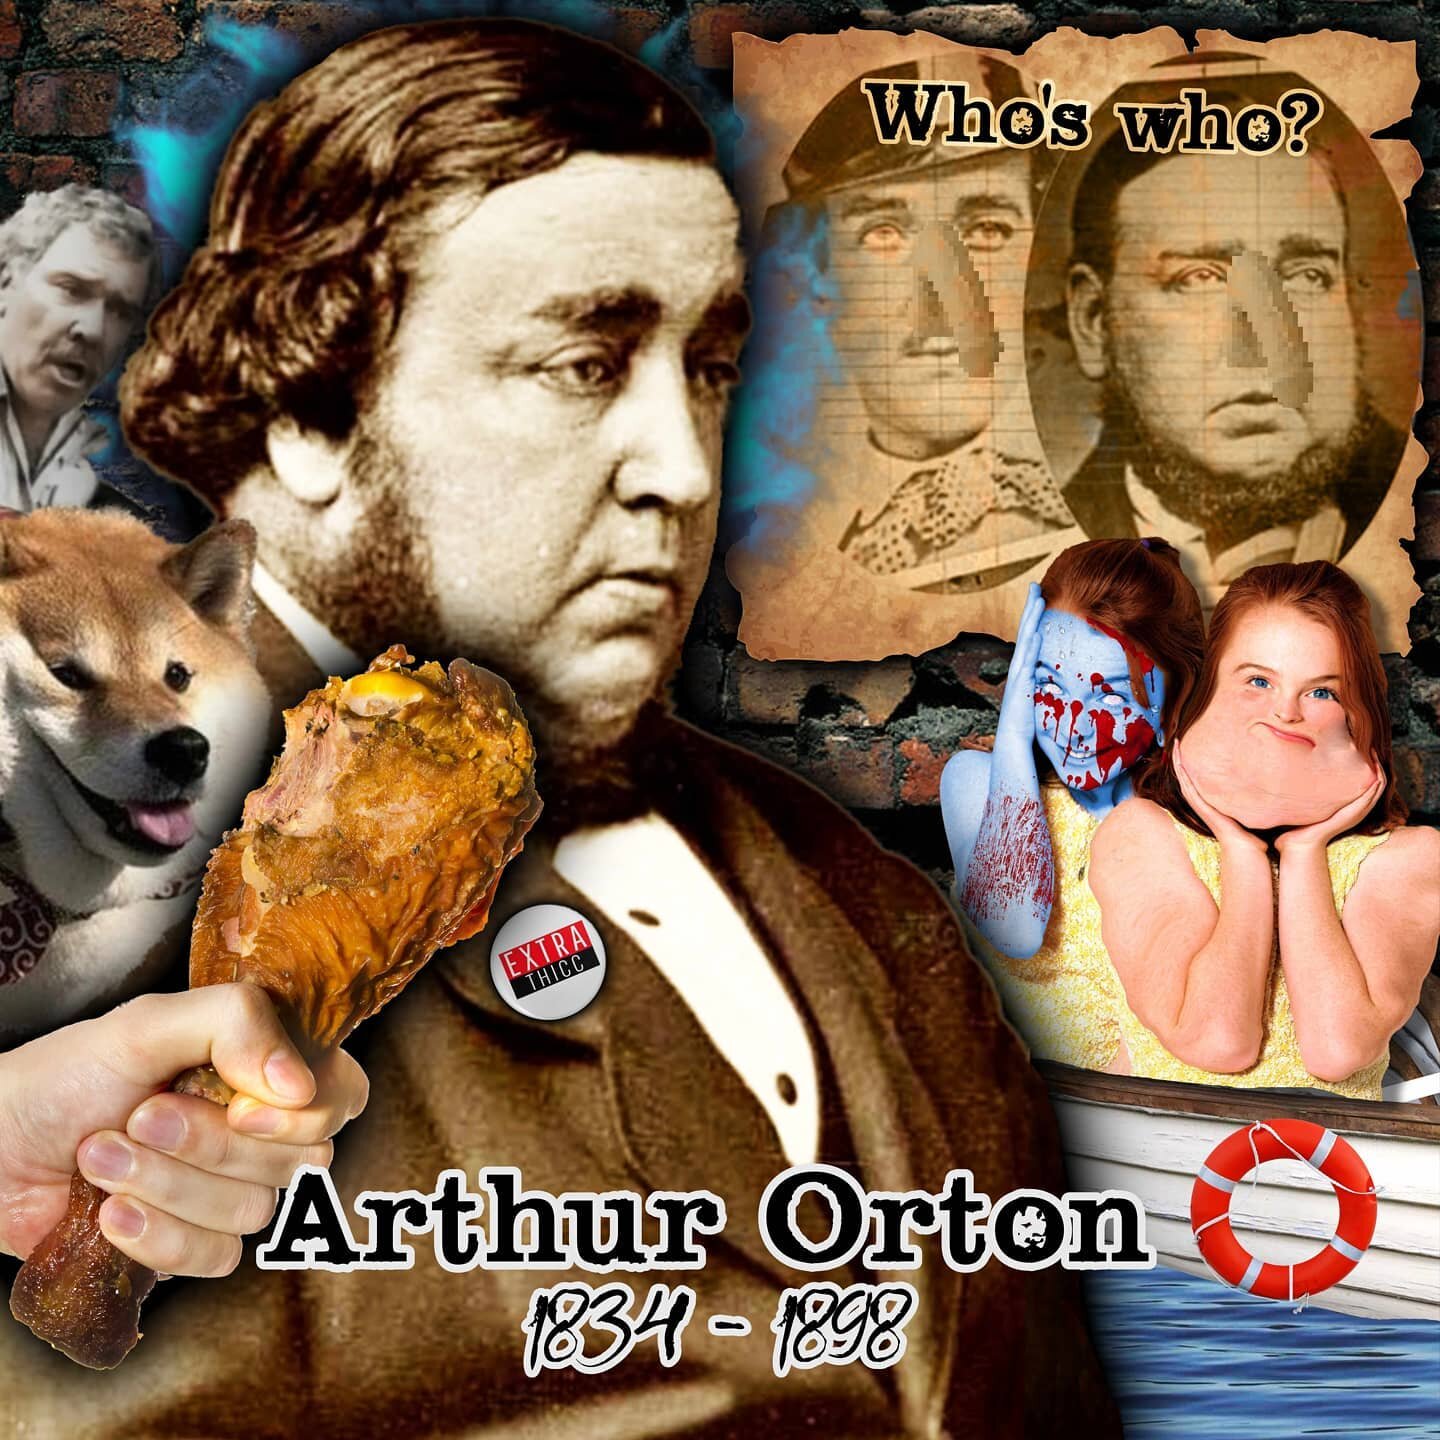 NEW EPISODE 

400 lb Arthur Orton was a man that lived triple lives... pun intended. 

The secret to his true identity lay untouched, hidden away for decades between his THICC thighs.

iTunes
► https://t.co/1iTEMuzKzl
Spotify
► https://t.co/KjIwAFy07